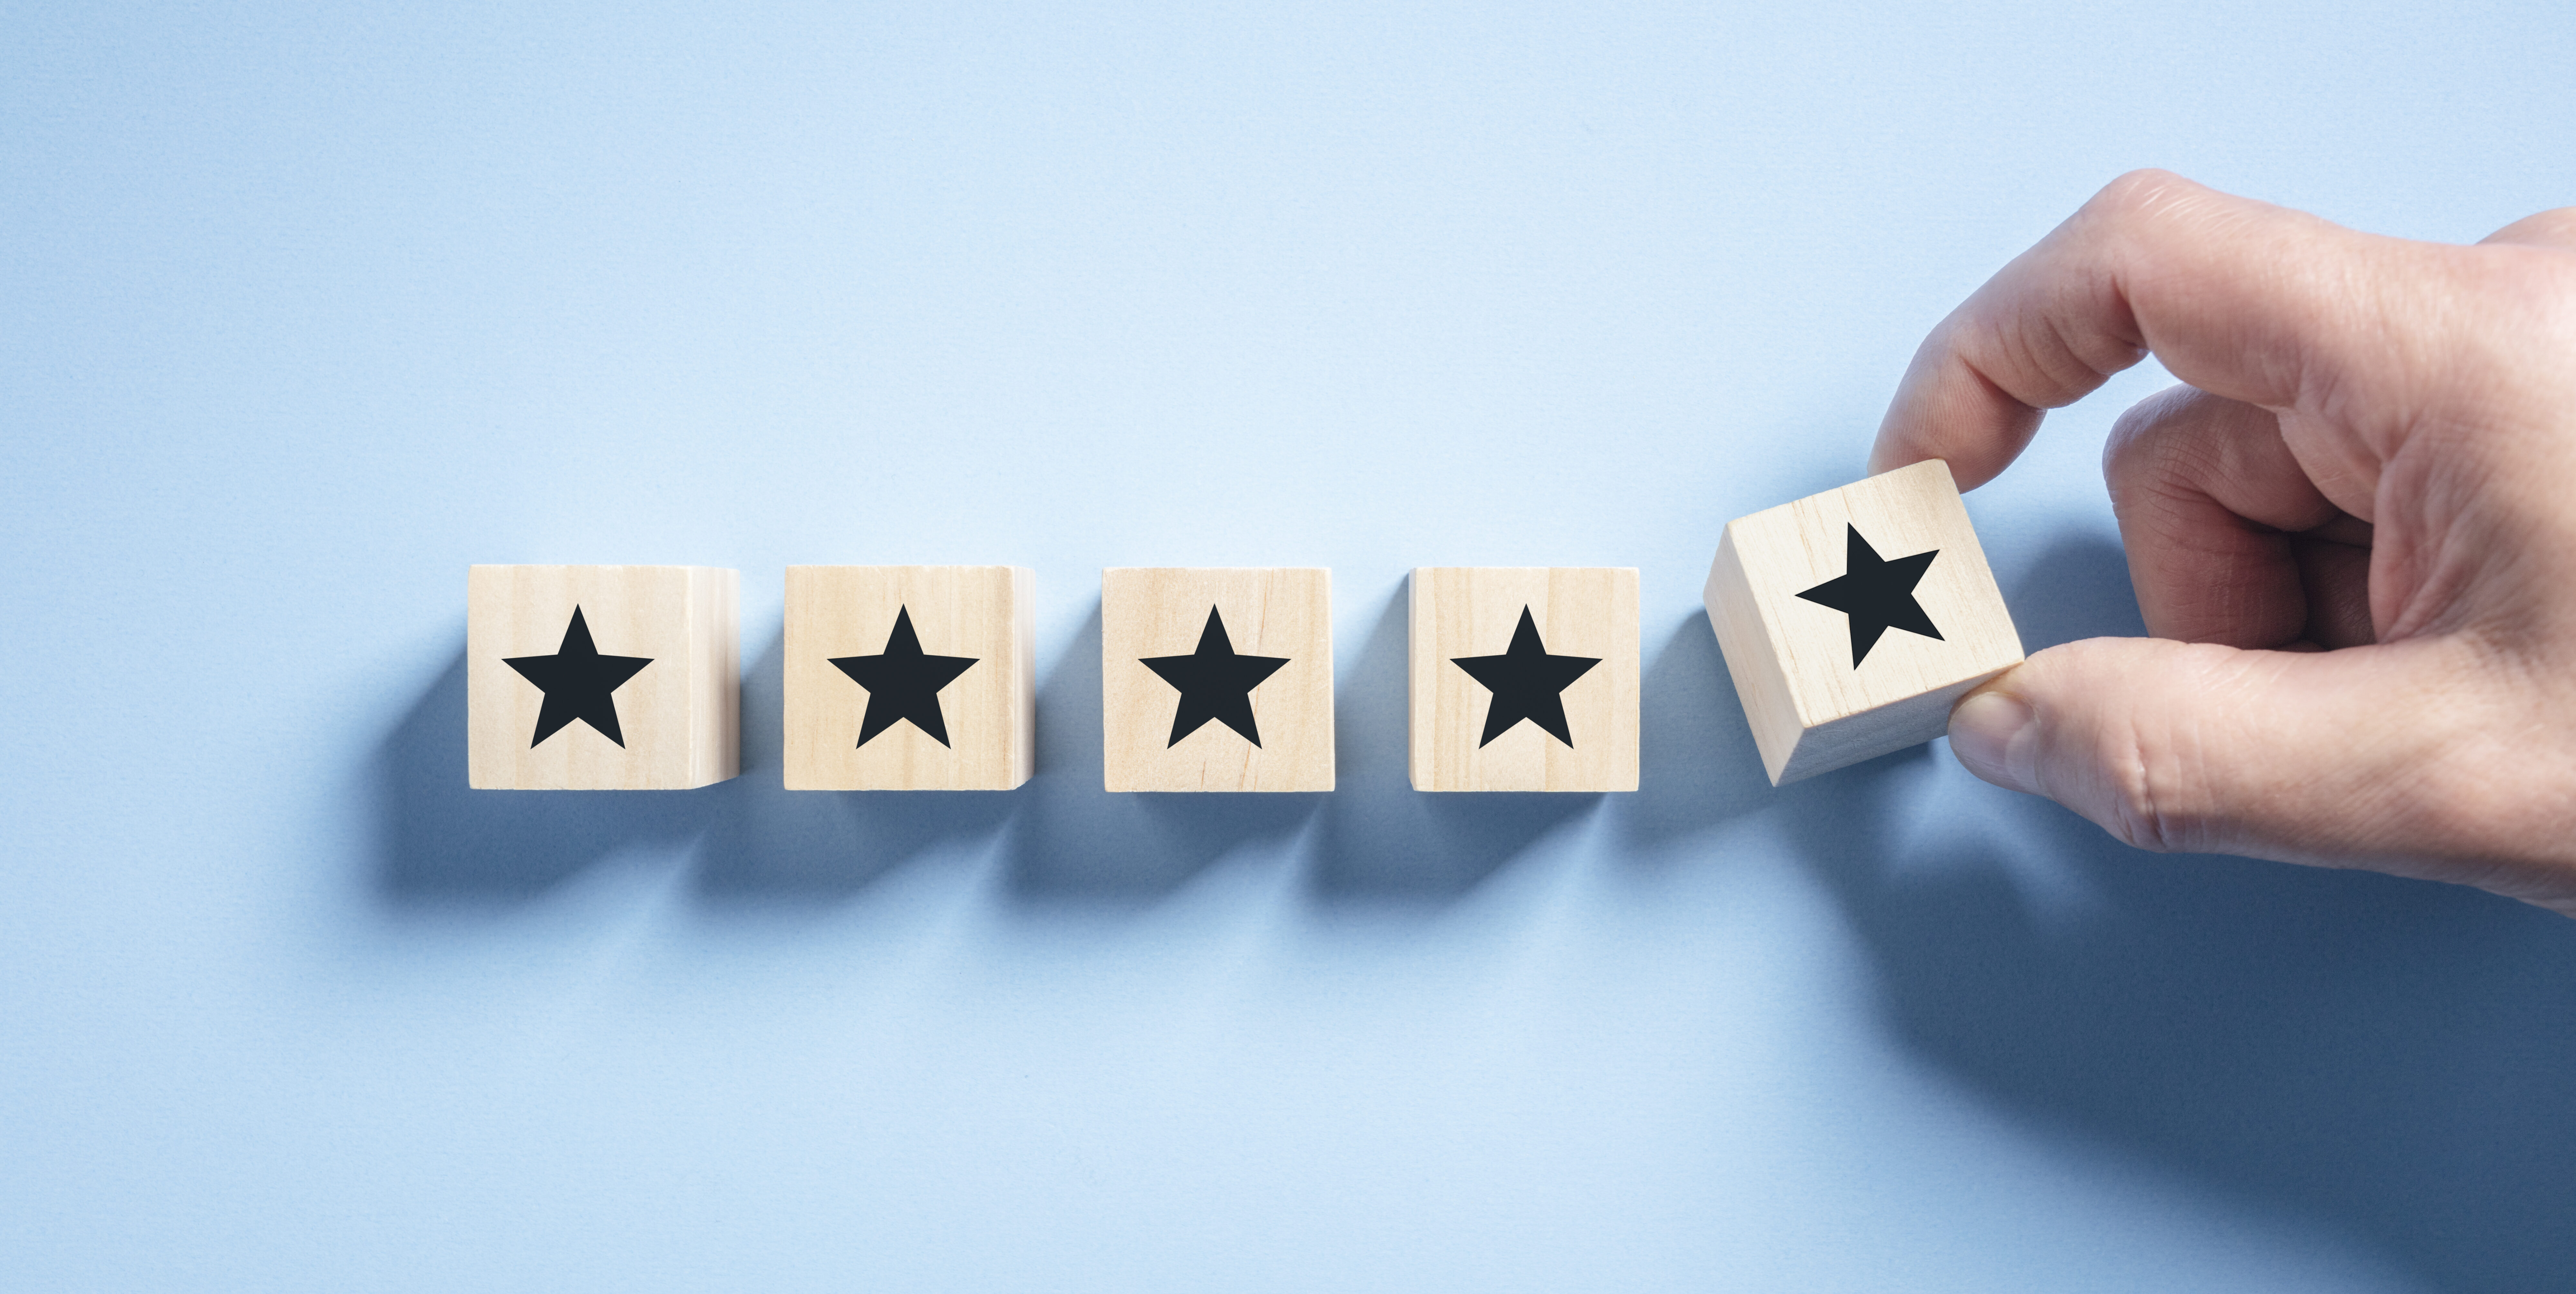 Customer experience feedback rate satisfaction experience five star rating placing wooden blocks on blue background